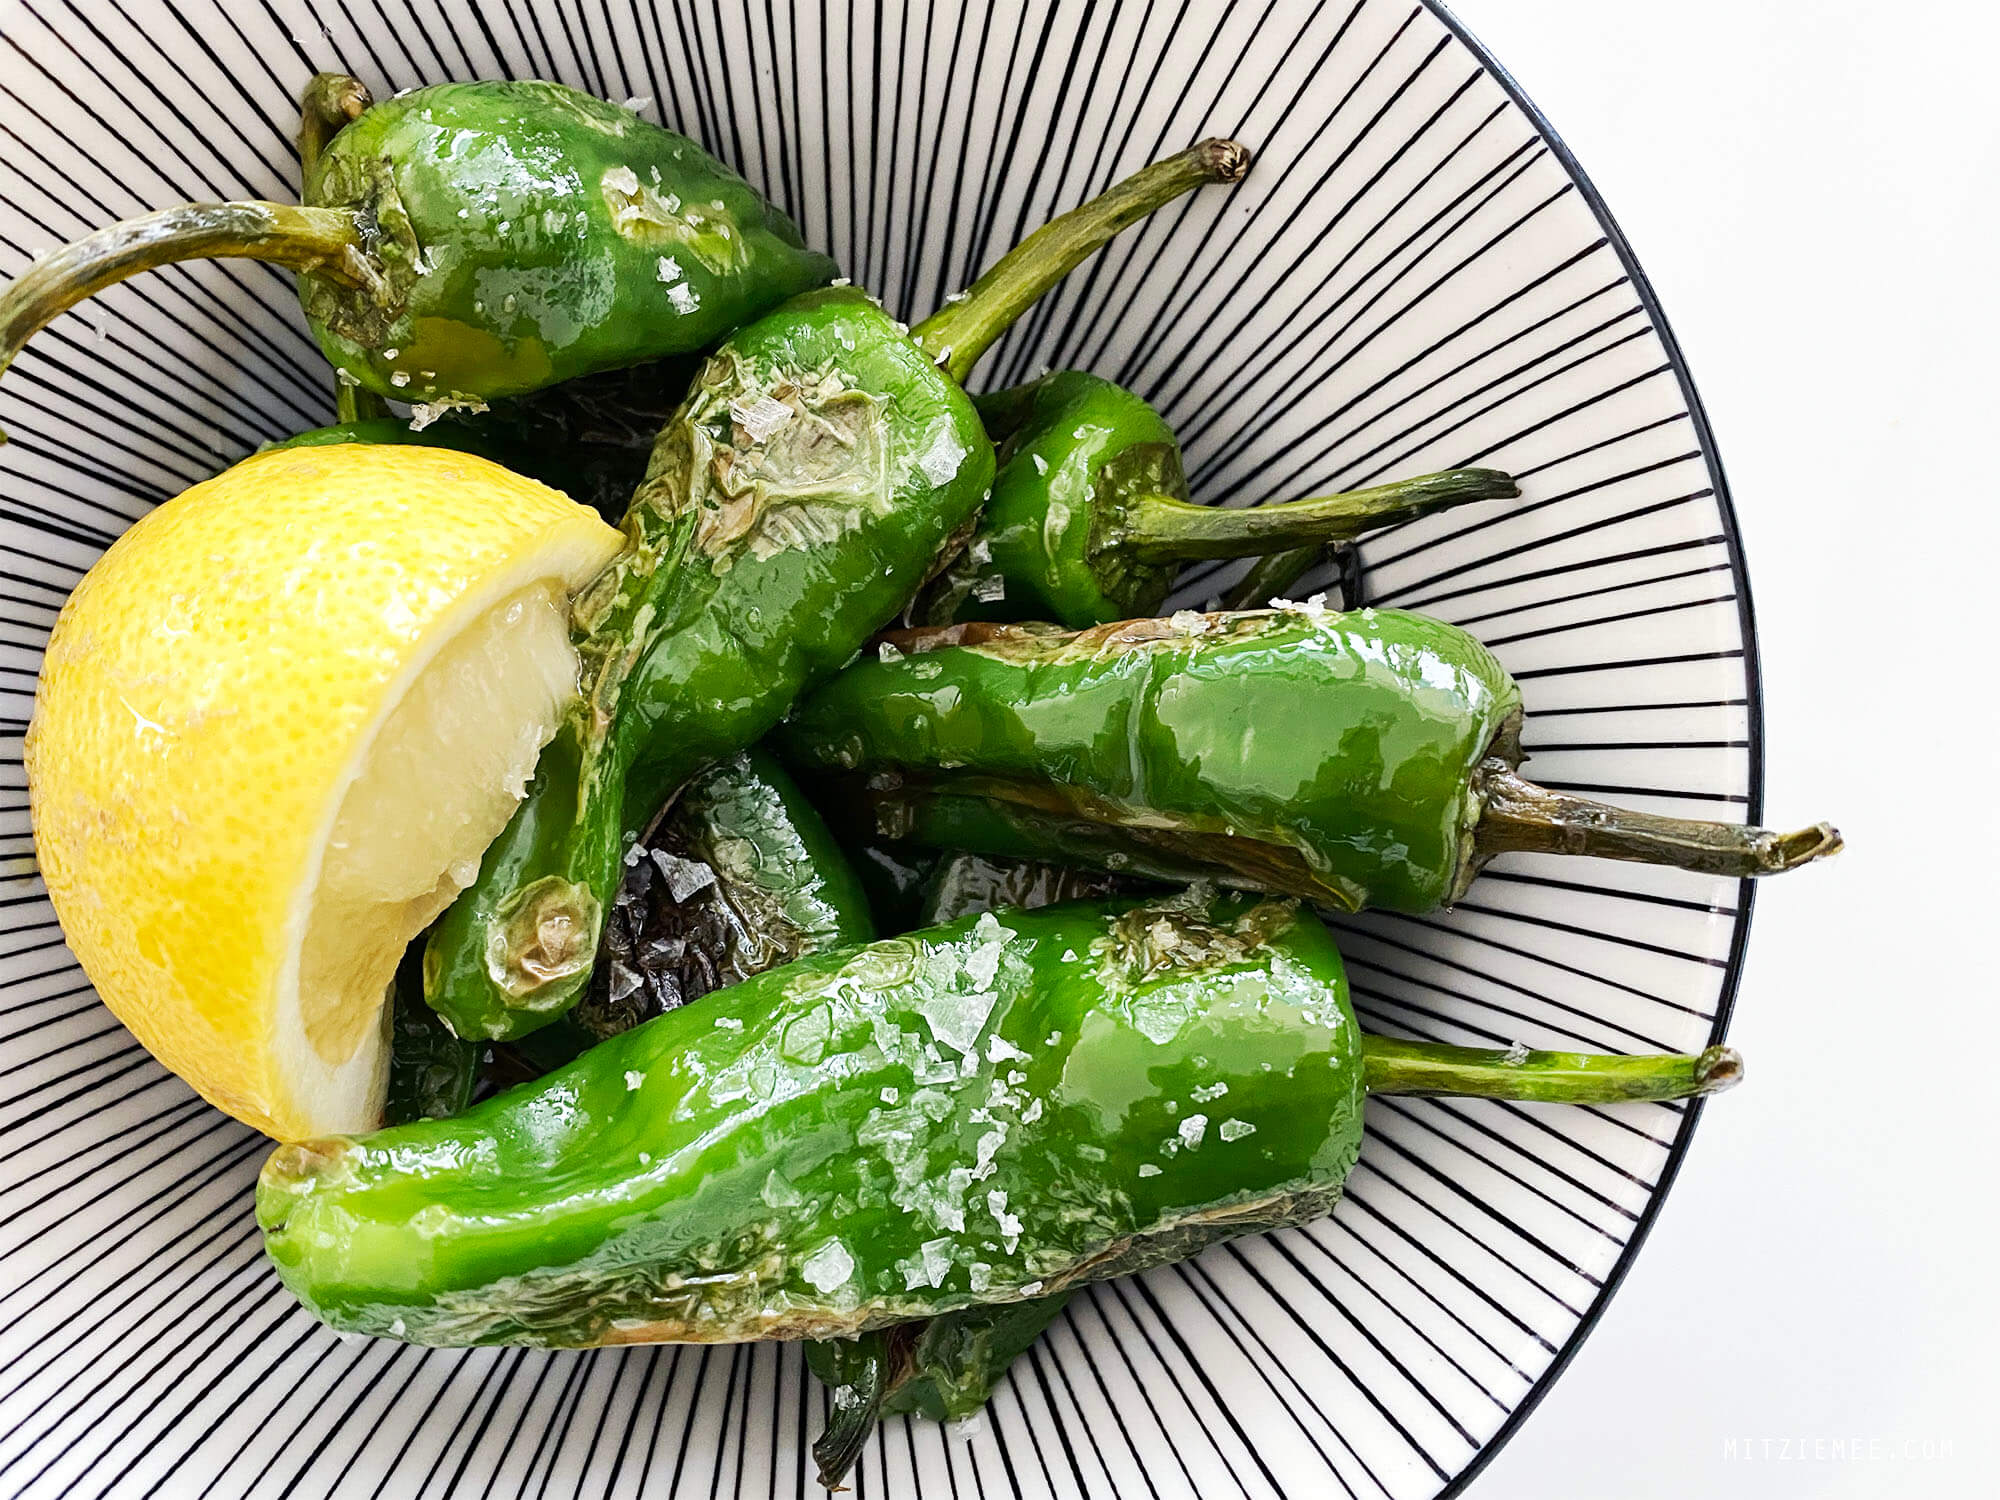 Pimientos de Padrón - Blistered Padrón peppers